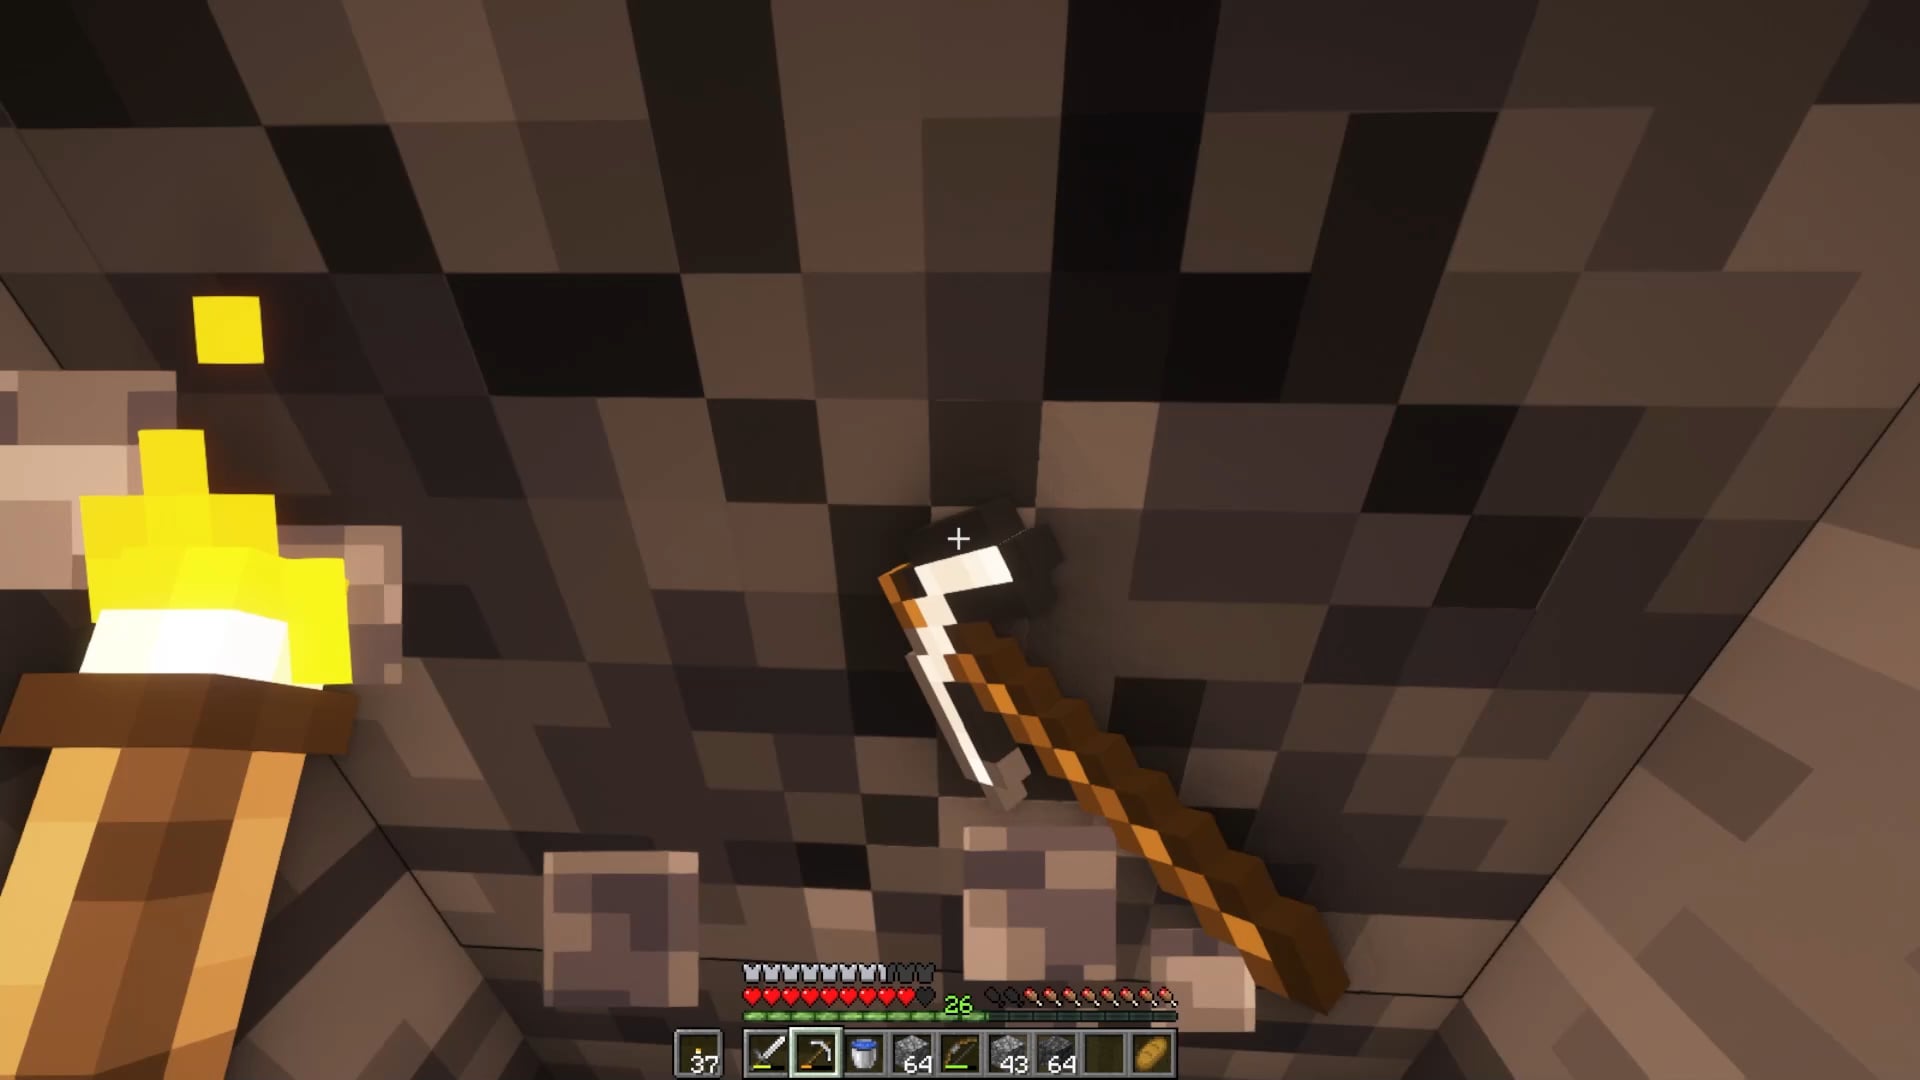 Minecraft Memes - When You Stay Up Mining Too Long!